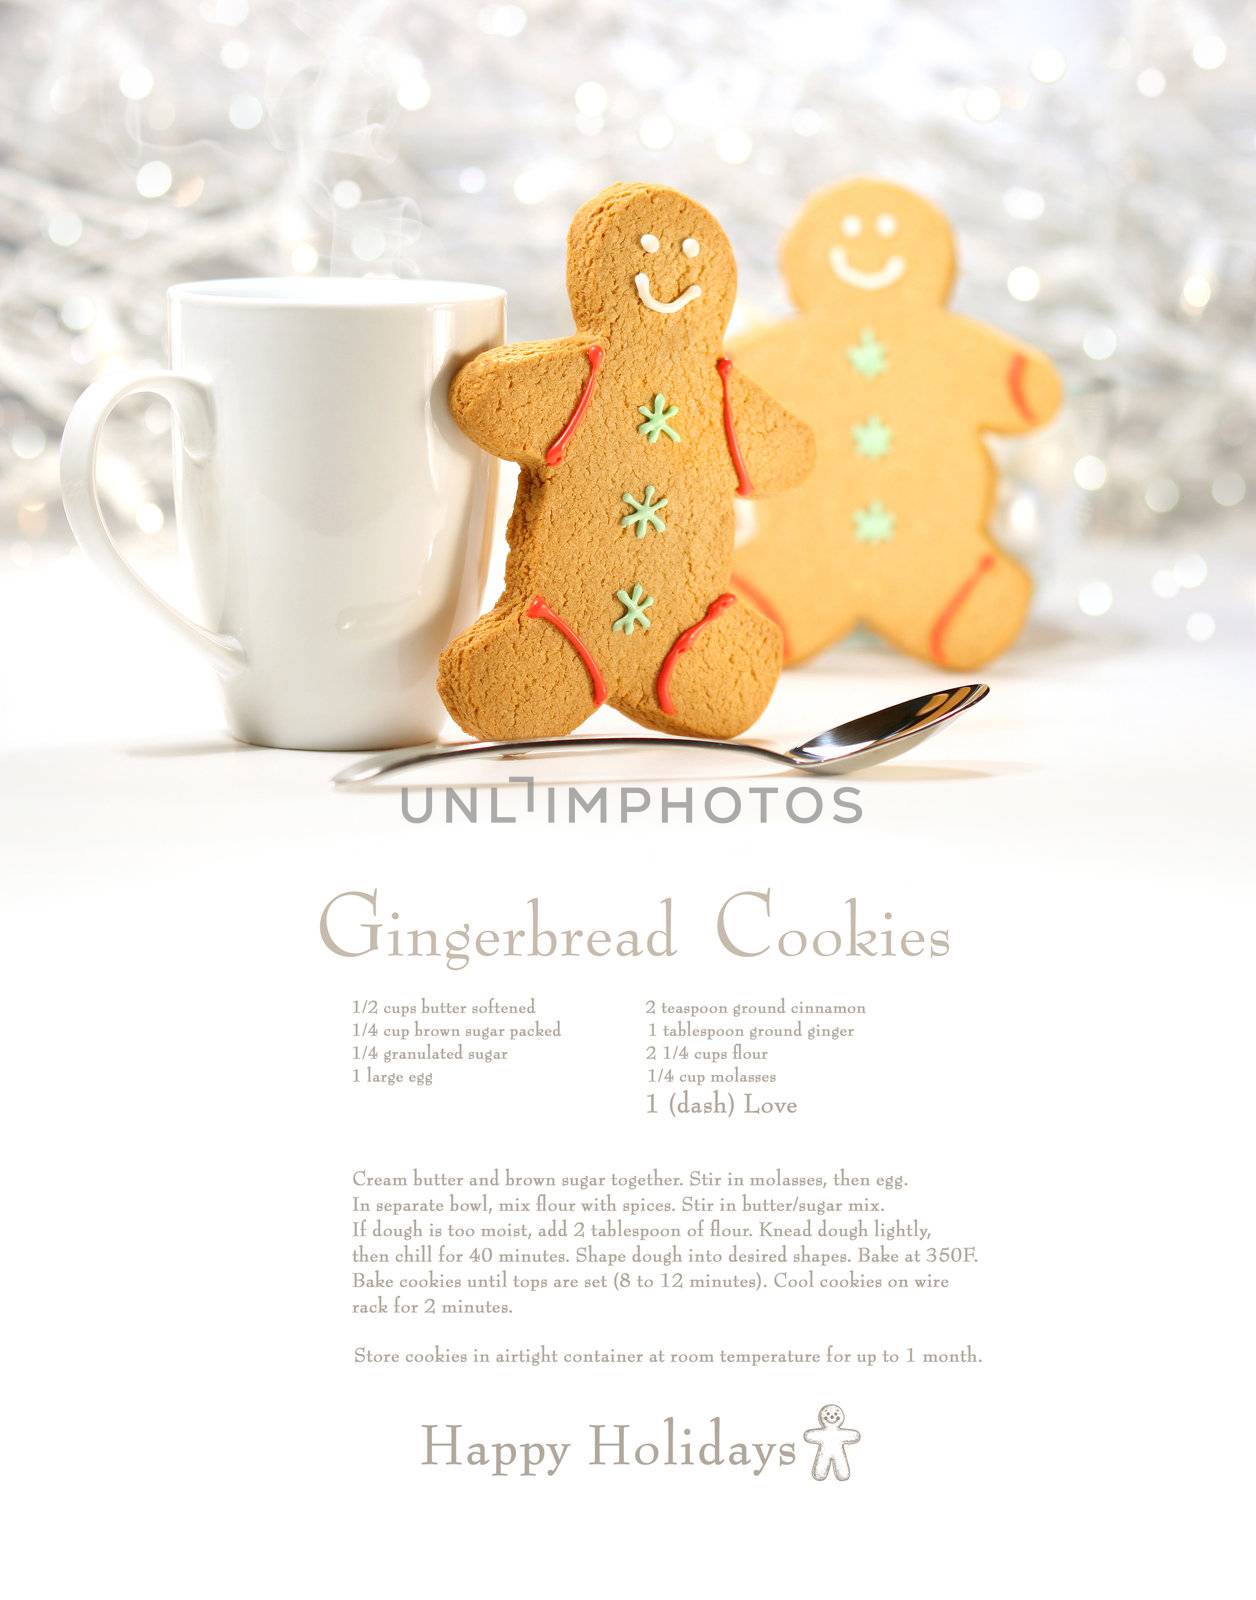 Hot holiday drink with gingerbread cookies with recipe by Sandralise